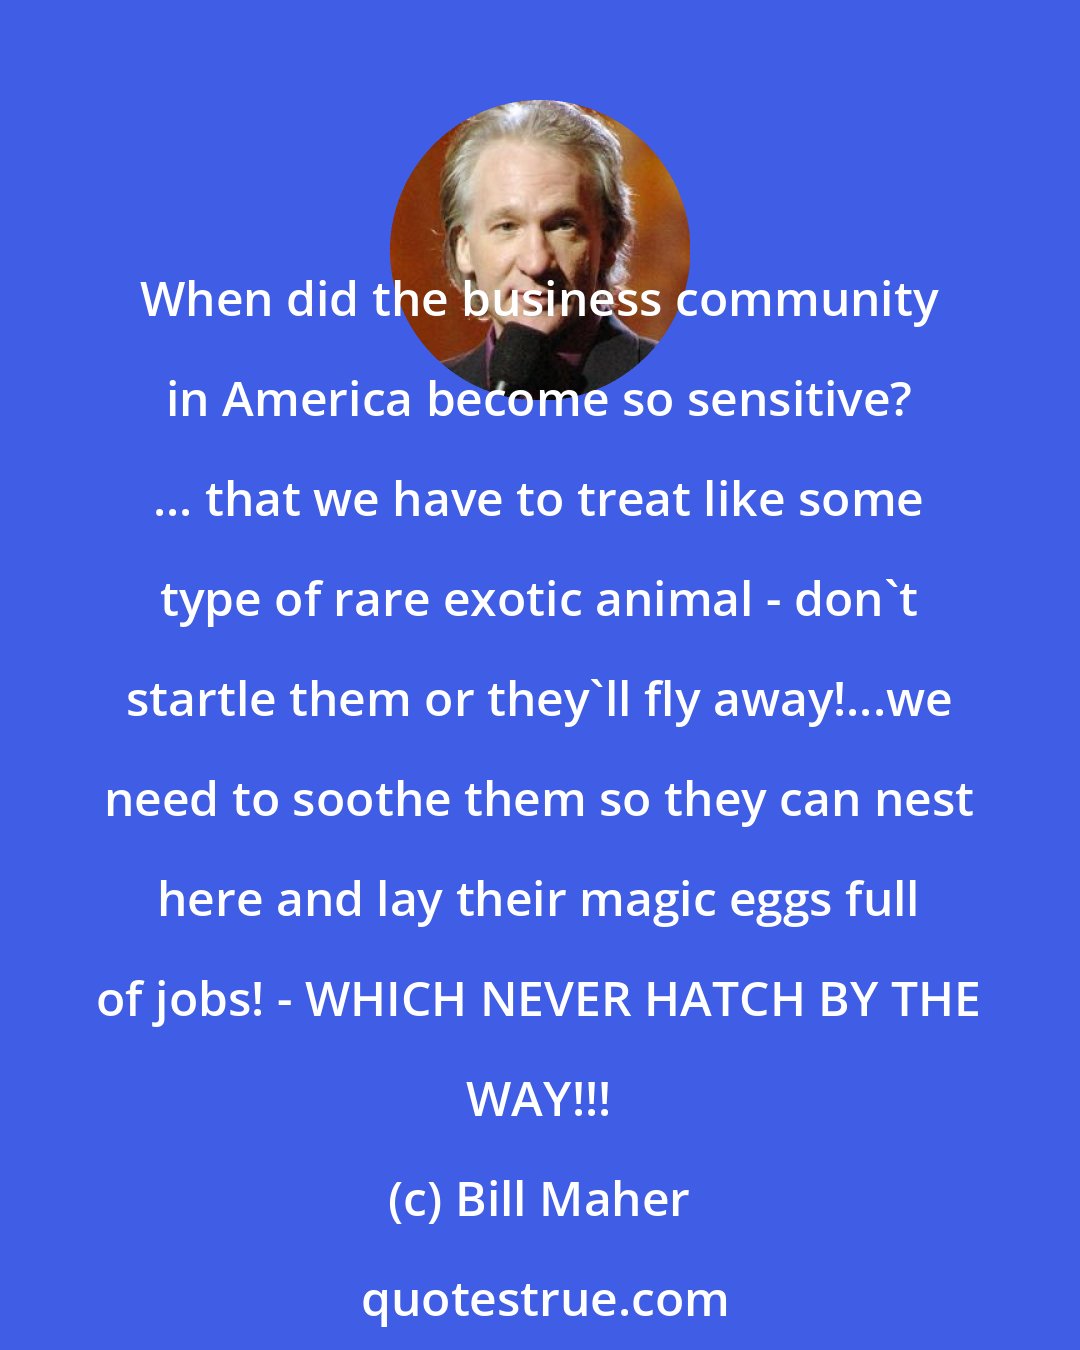 Bill Maher: When did the business community in America become so sensitive? ... that we have to treat like some type of rare exotic animal - don't startle them or they'll fly away!...we need to soothe them so they can nest here and lay their magic eggs full of jobs! - WHICH NEVER HATCH BY THE WAY!!!